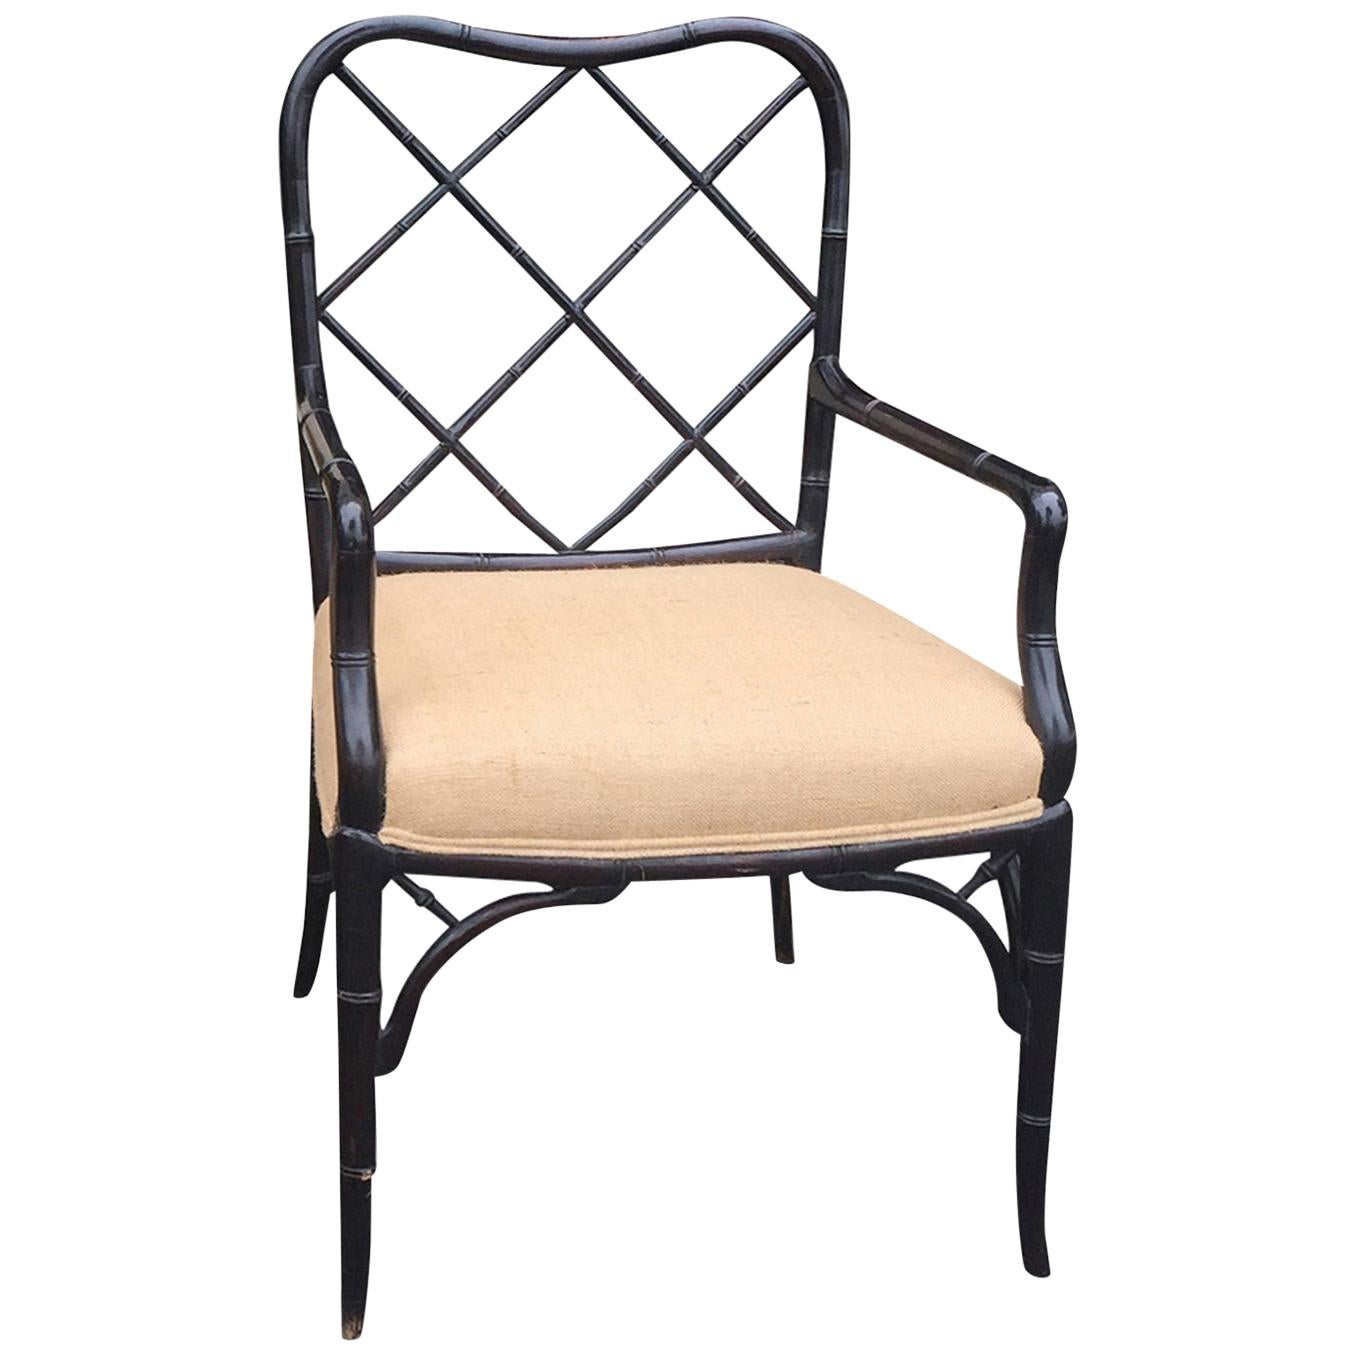 Faux Bamboo Black Painted Armchair, circa 1940s-1950s